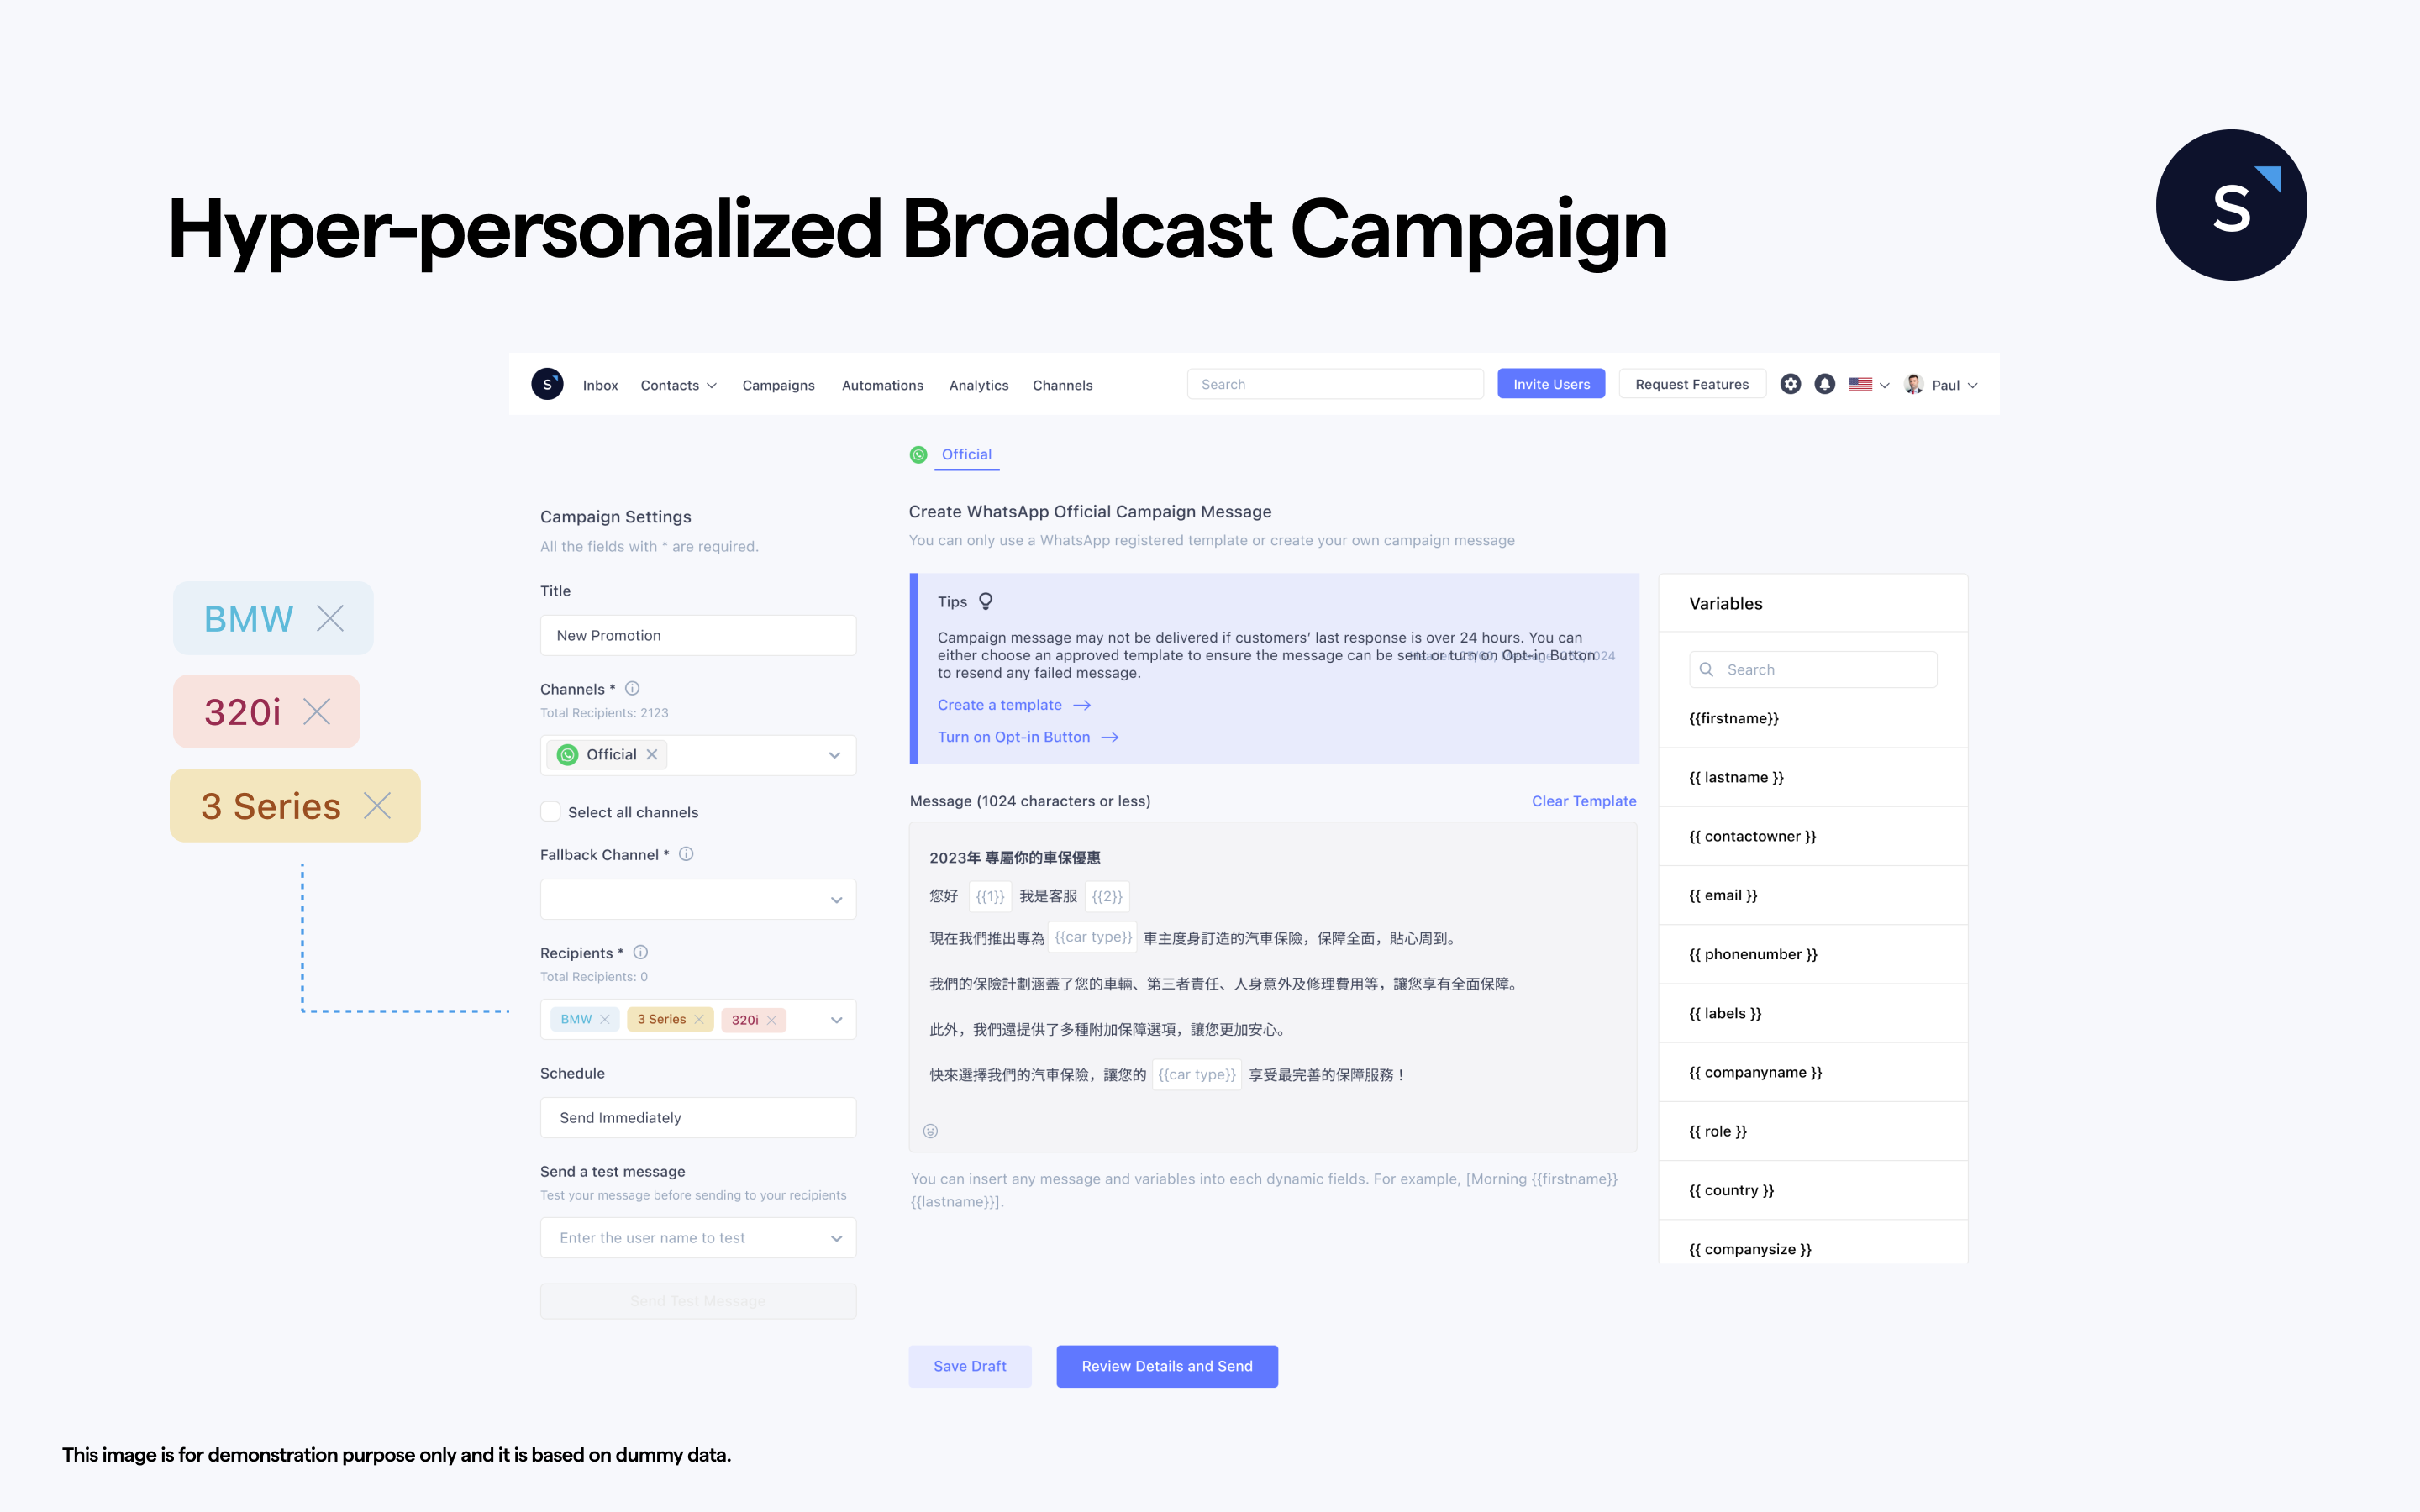 Hyper-personalized campaigns AutoMate